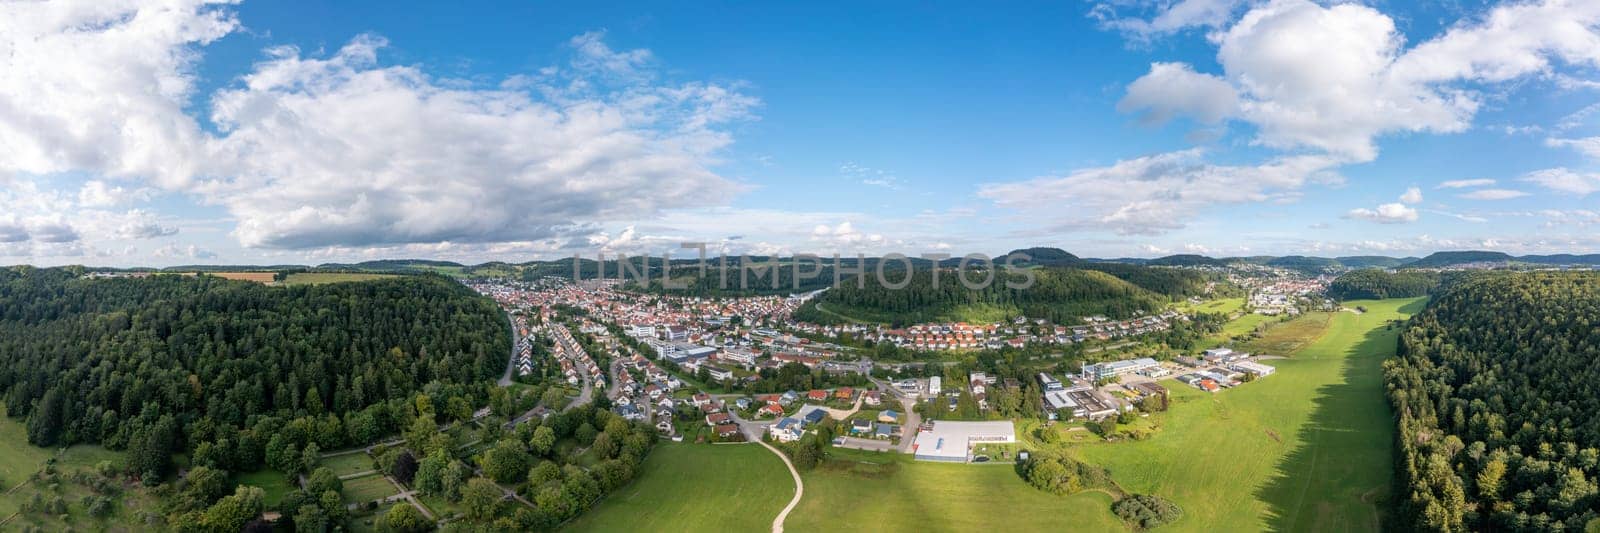 Panoramic View of Albstadt in Summer by AllesSuper